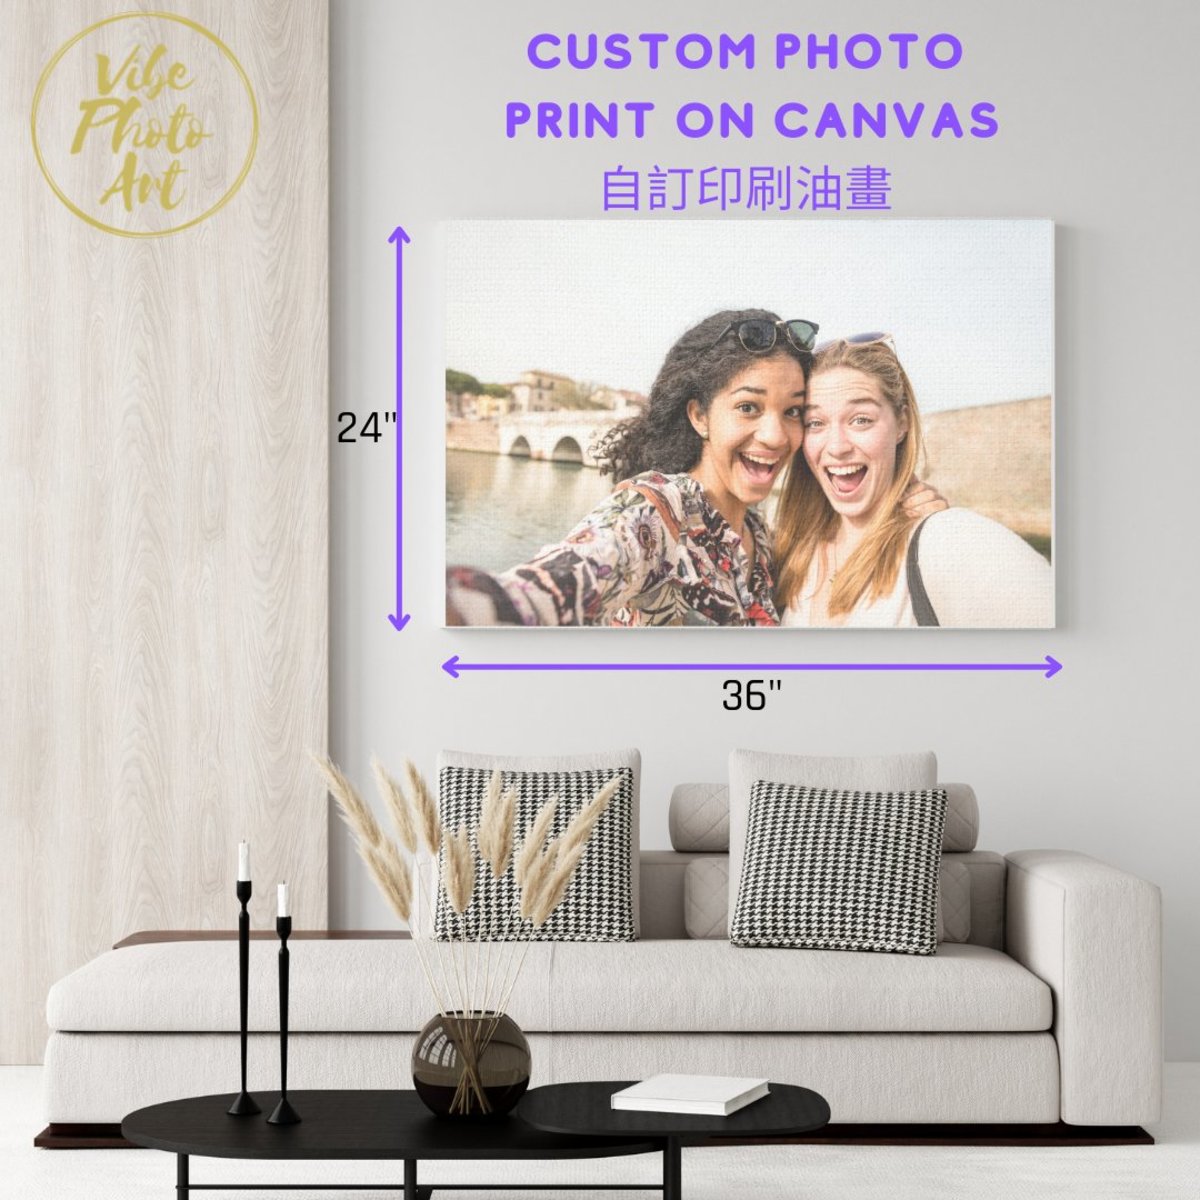 Custom Photo Printed on Canvas with Inner Wooden Frame (24” x 36”, 61cm x 91cm)